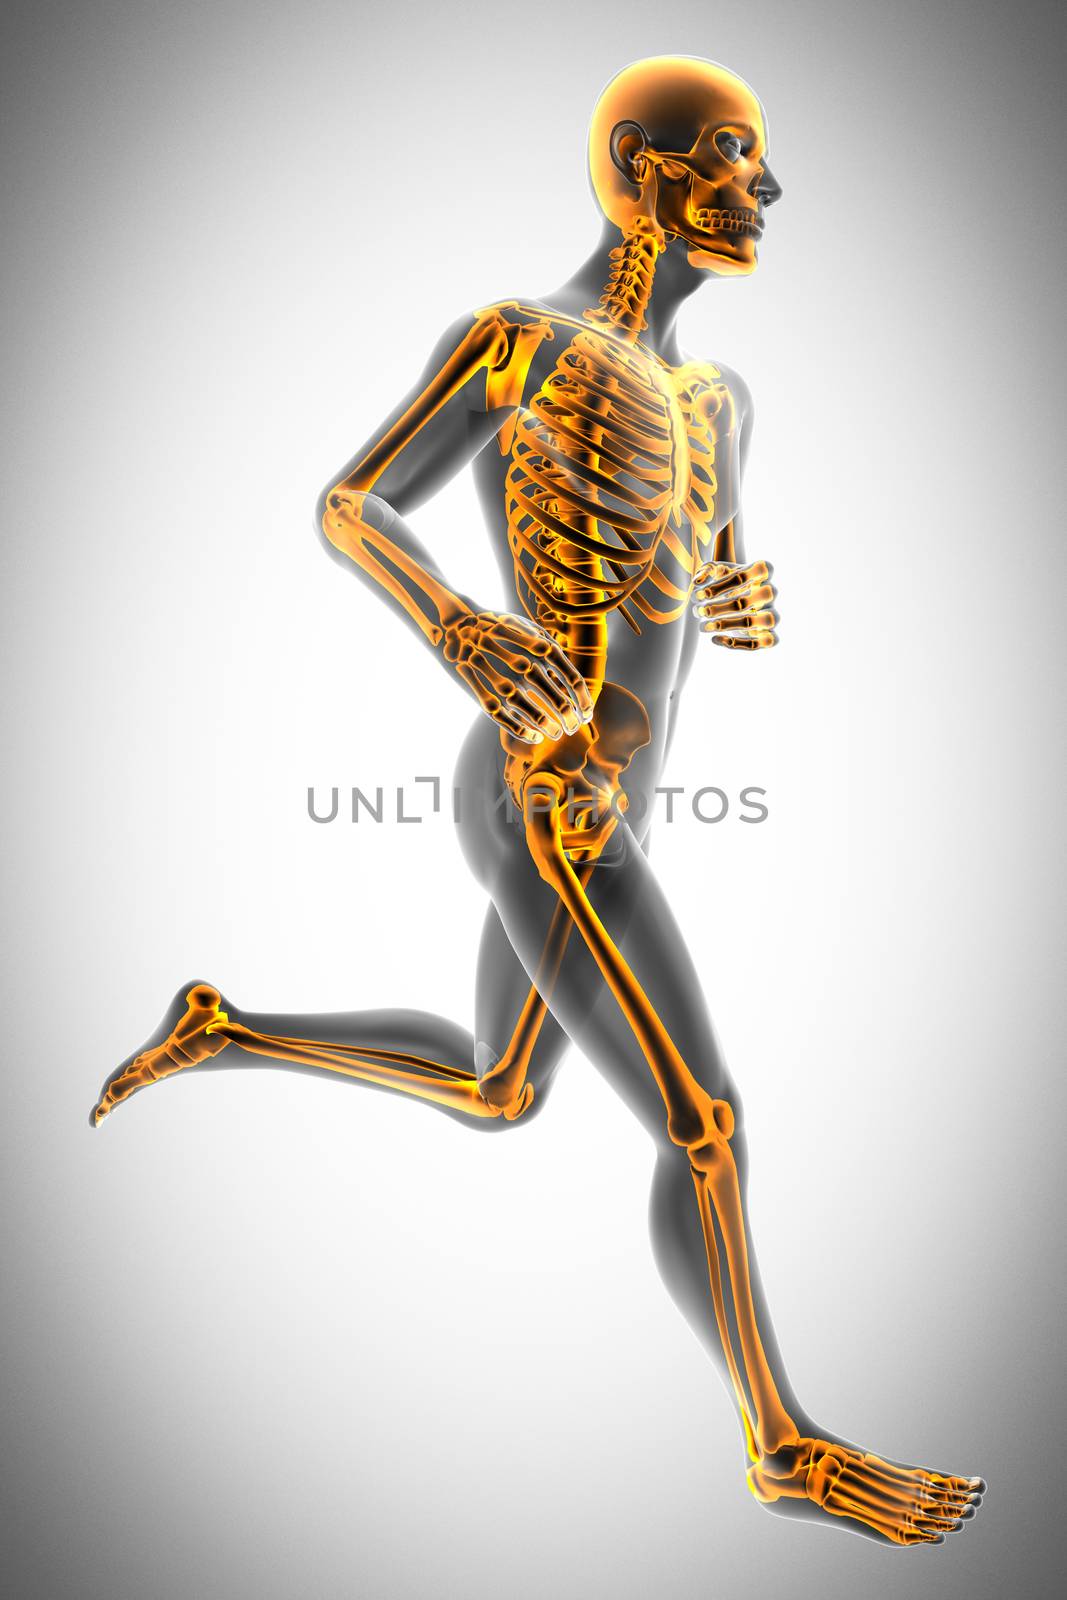 human bones radiography scan image by videodoctor